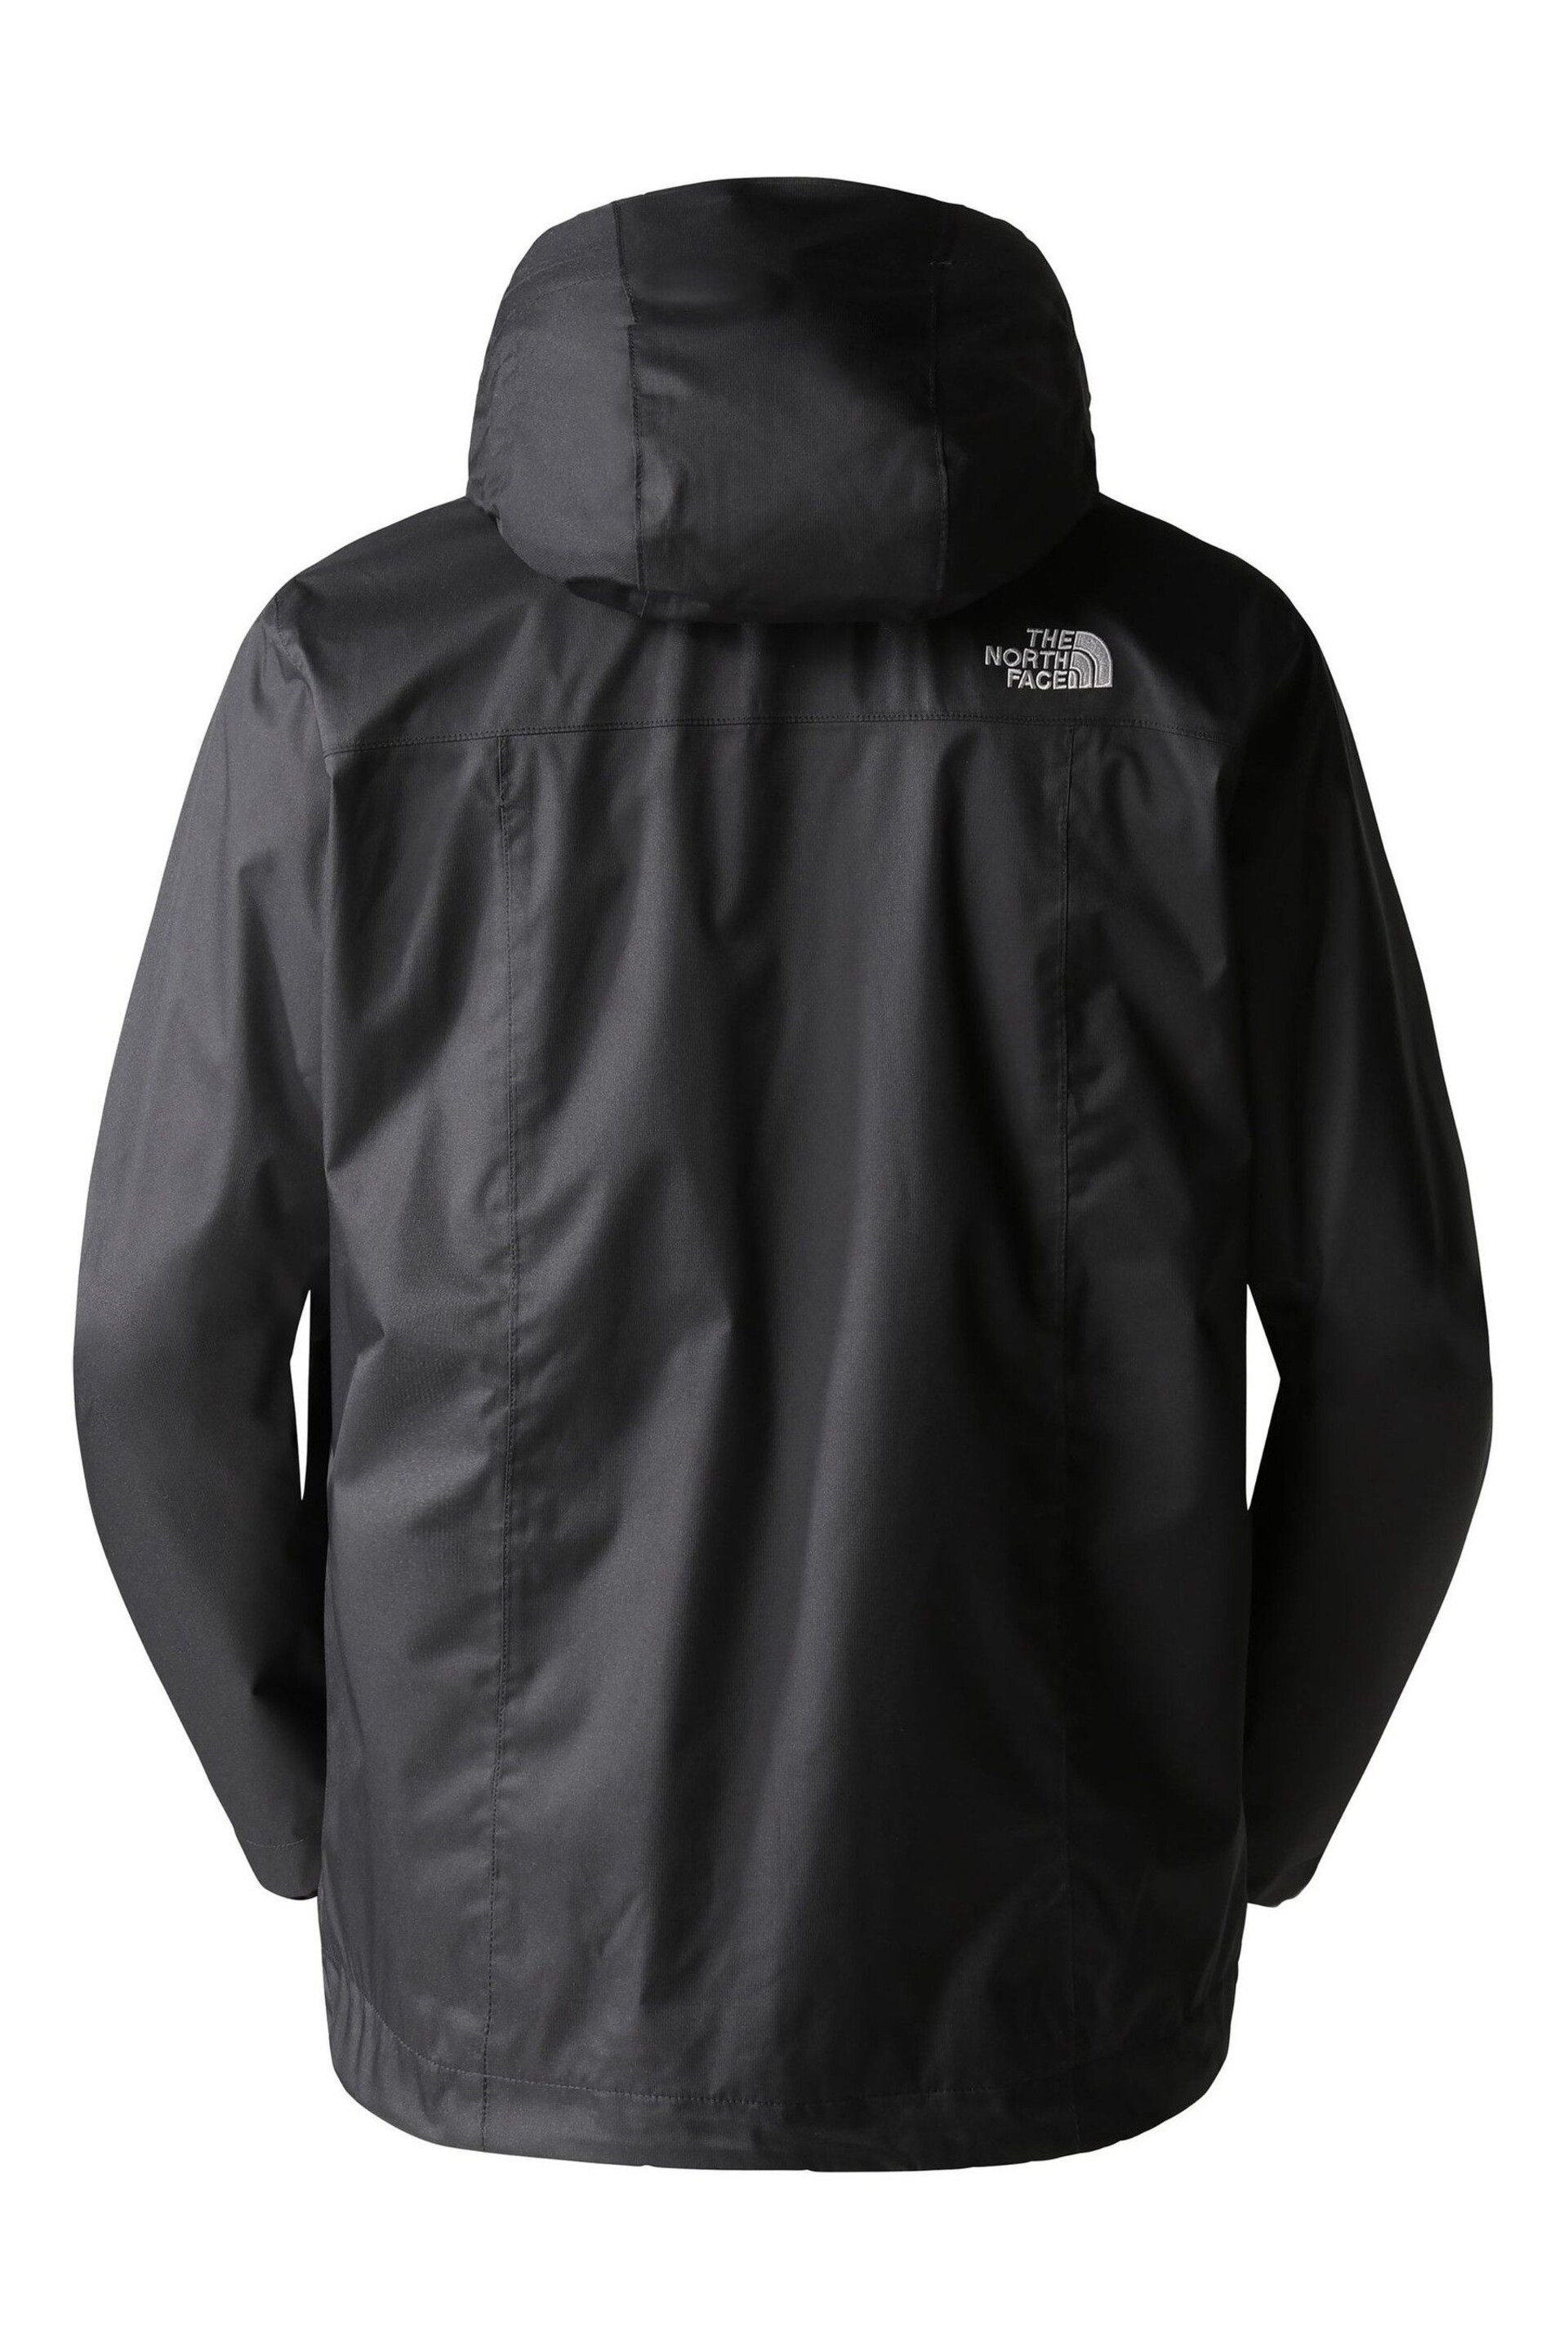 The North Face Black Evolve II Triclimate® Jacket - Image 6 of 7